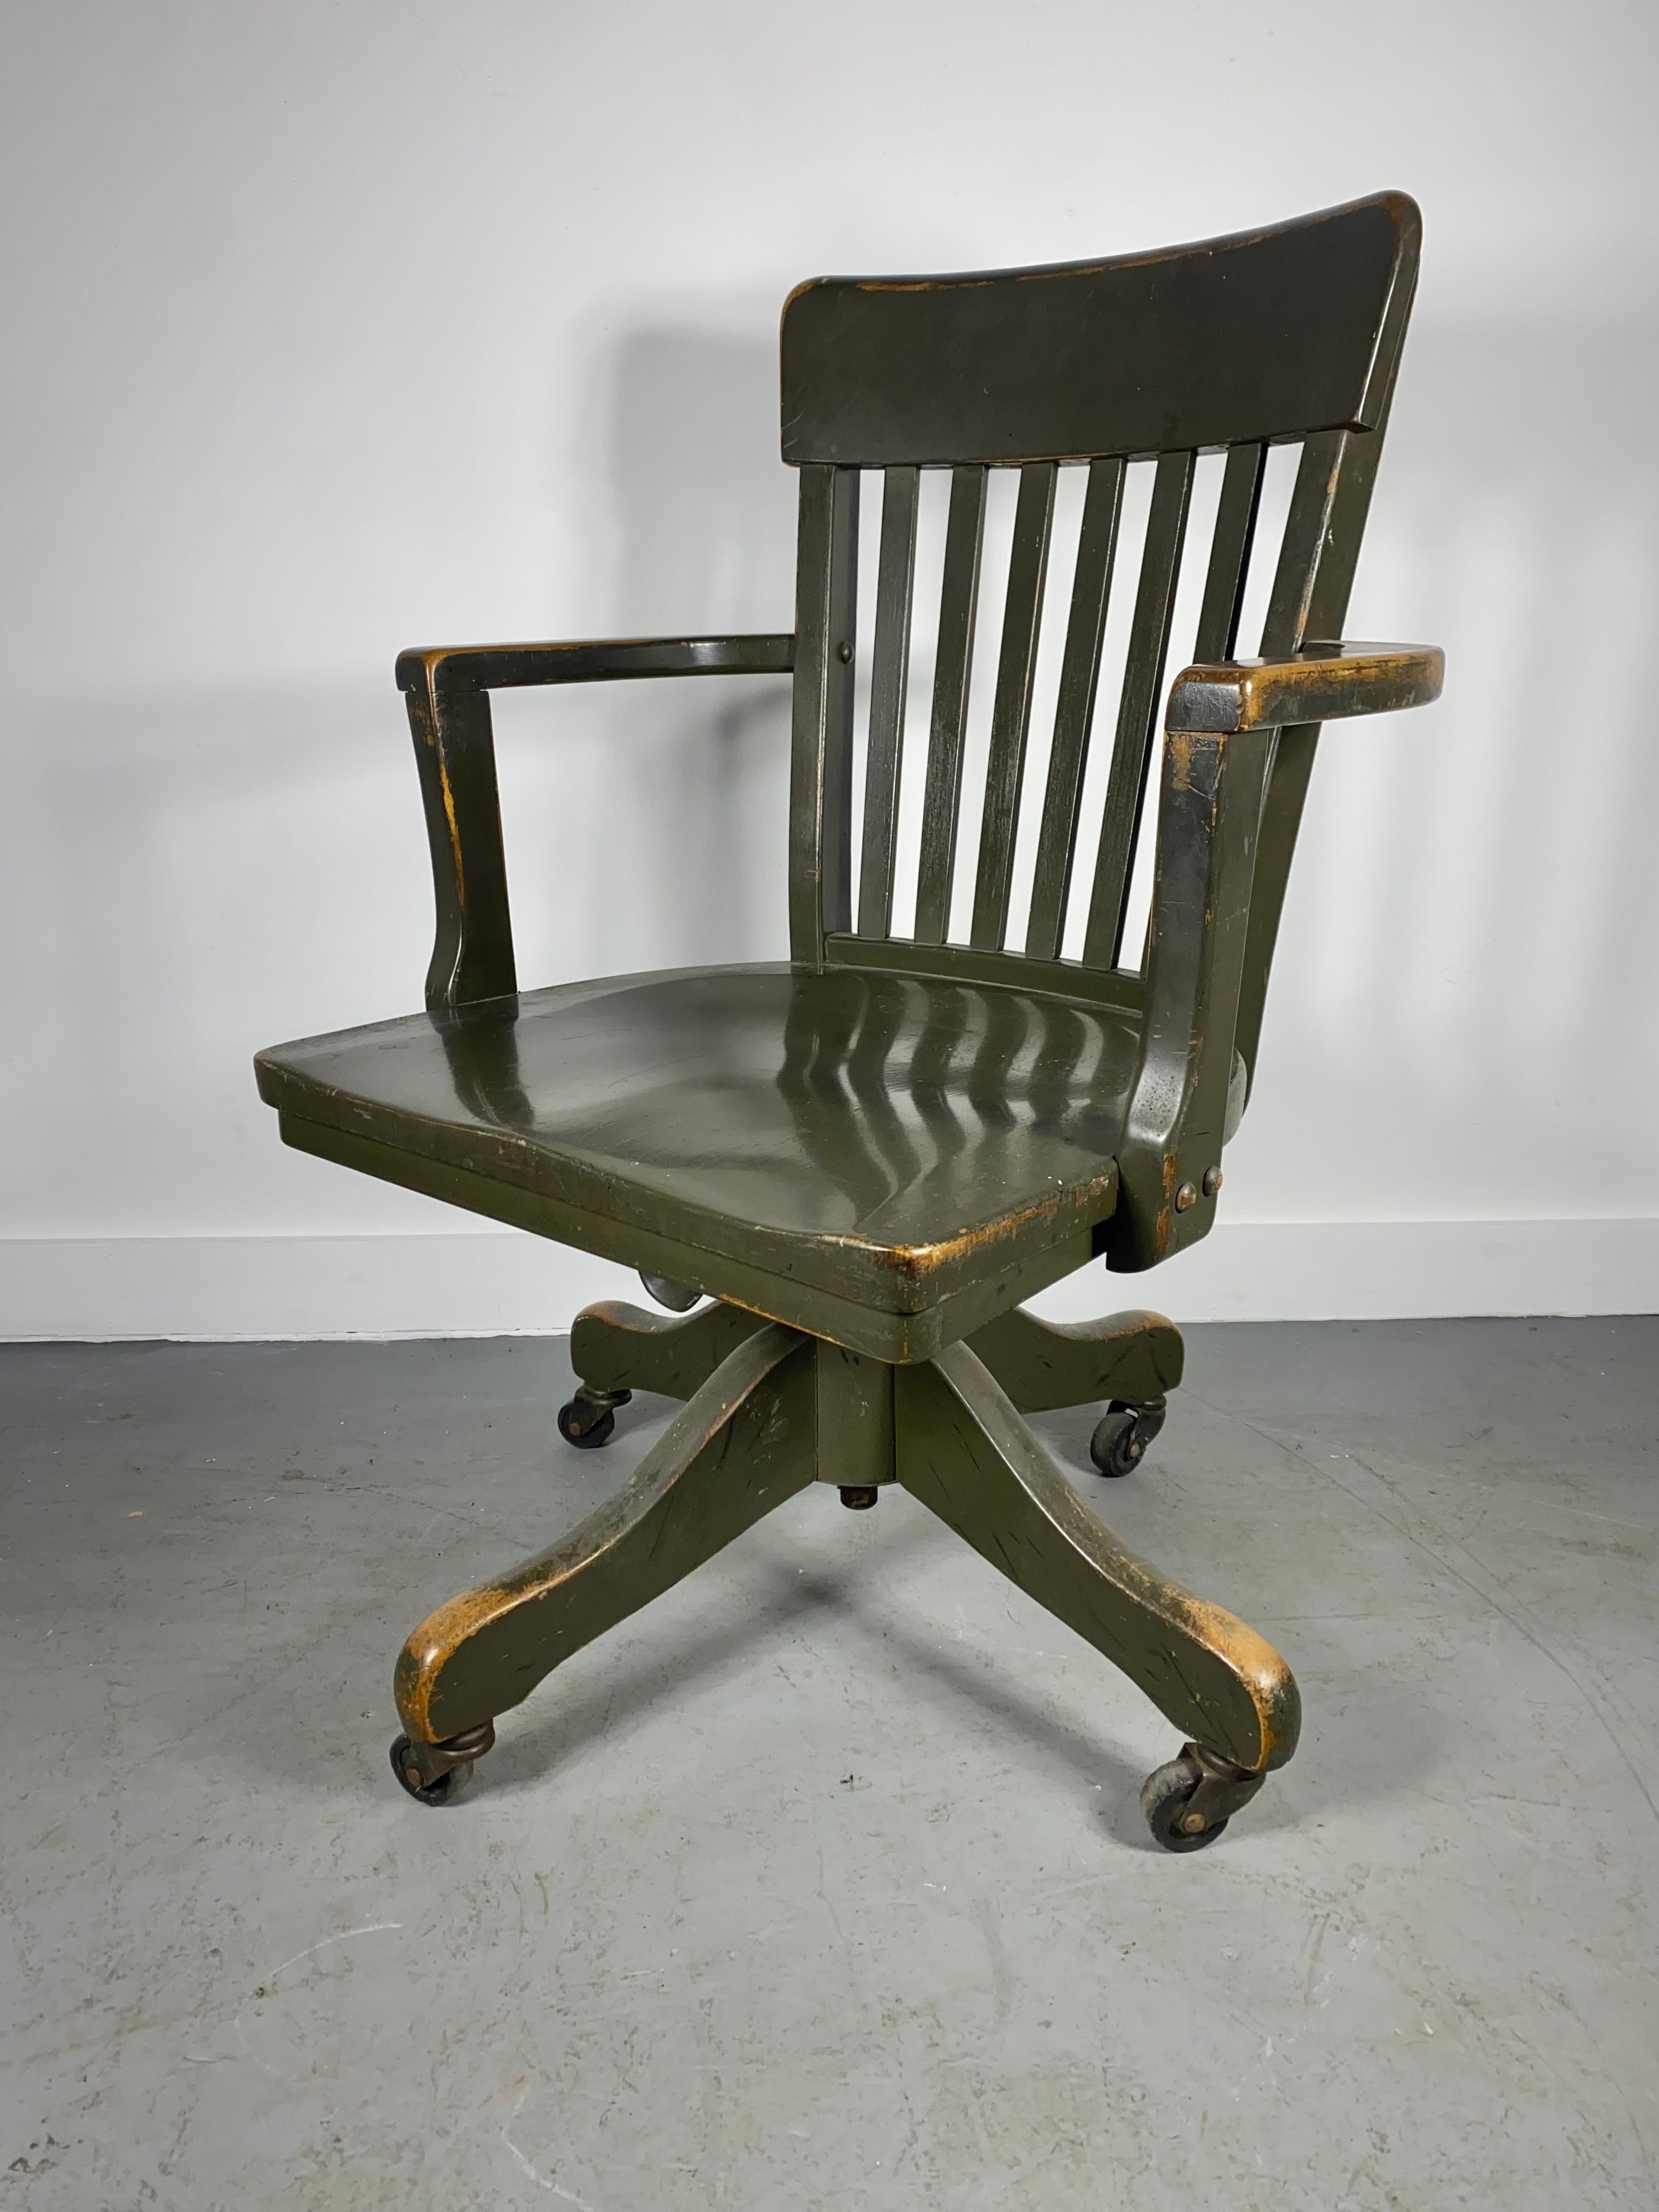 Classic Antique American Industrial Tilt Swivel desk / task chair. attributed to the Sikes Chair Company, Salvaged from CURTISS-WRIGHT CORP. Airplane Division. retains original Curtiss Wright label, Wonderful original patina, great old army green